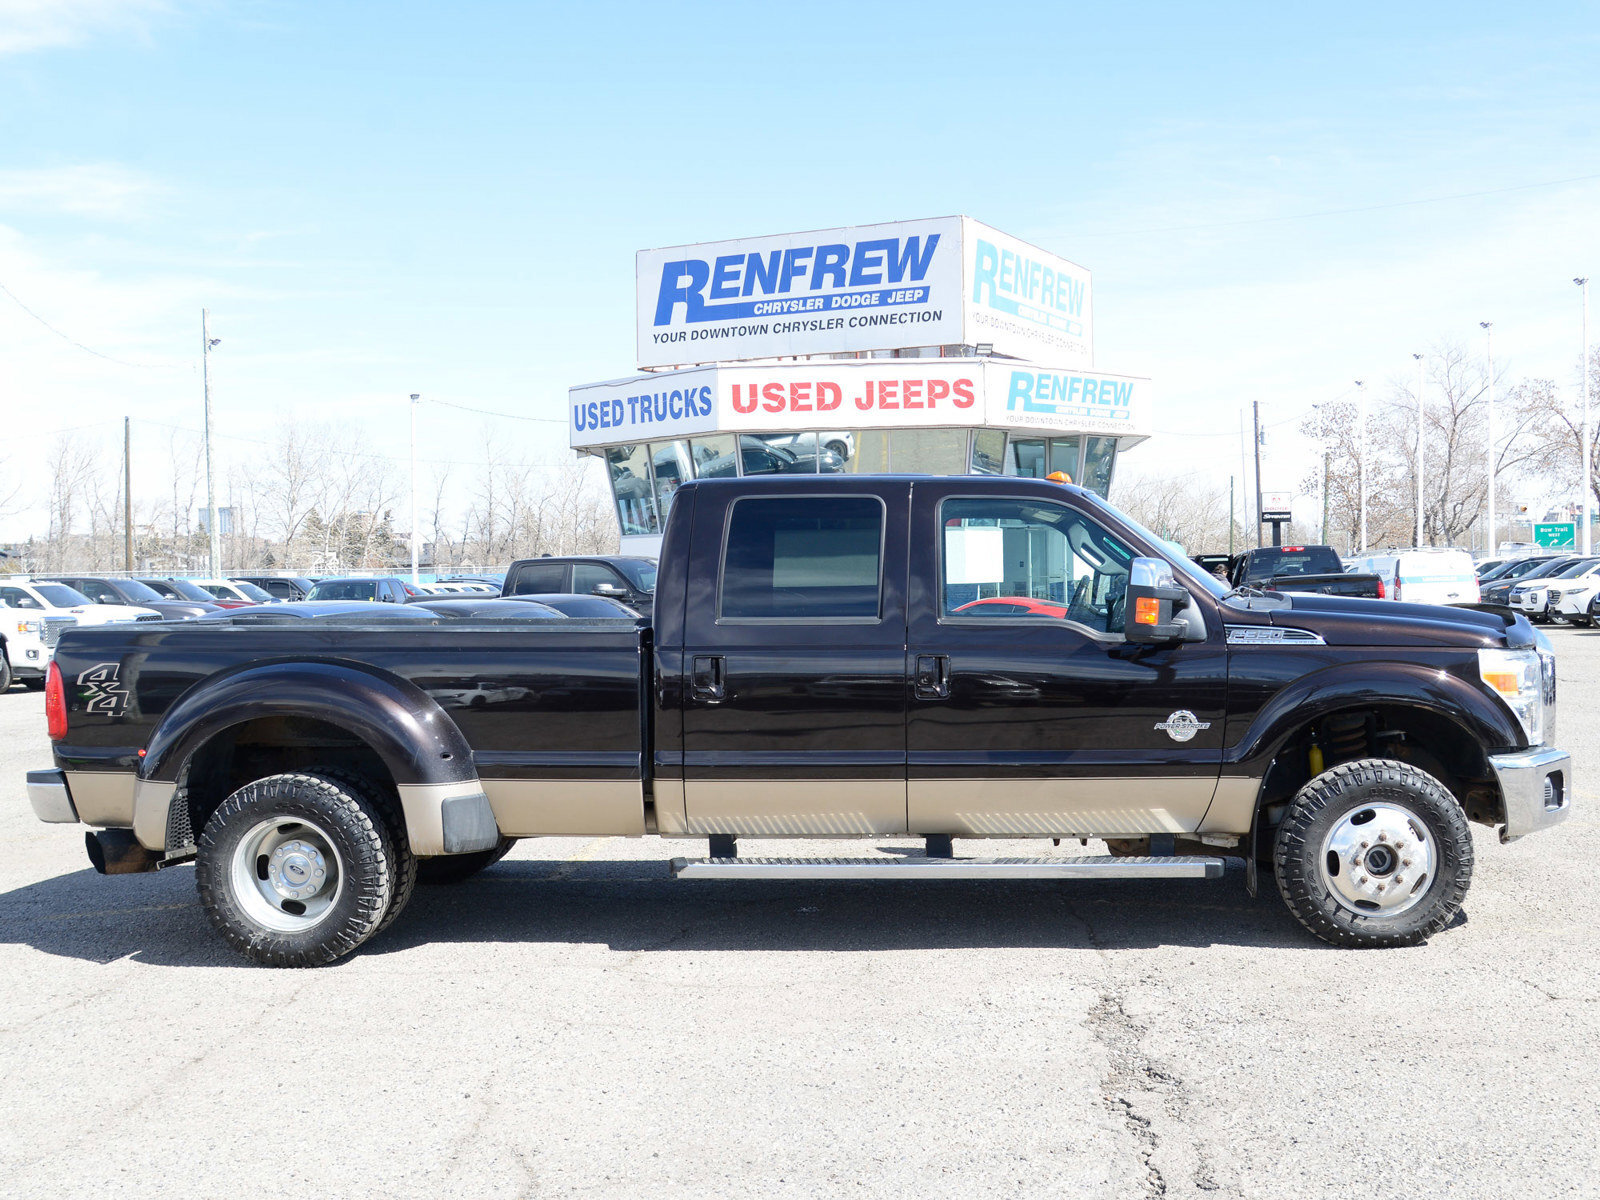 2013 Ford F-350 Lariat Crew Cab 4x4, Nav, Heated/Cooled Leather